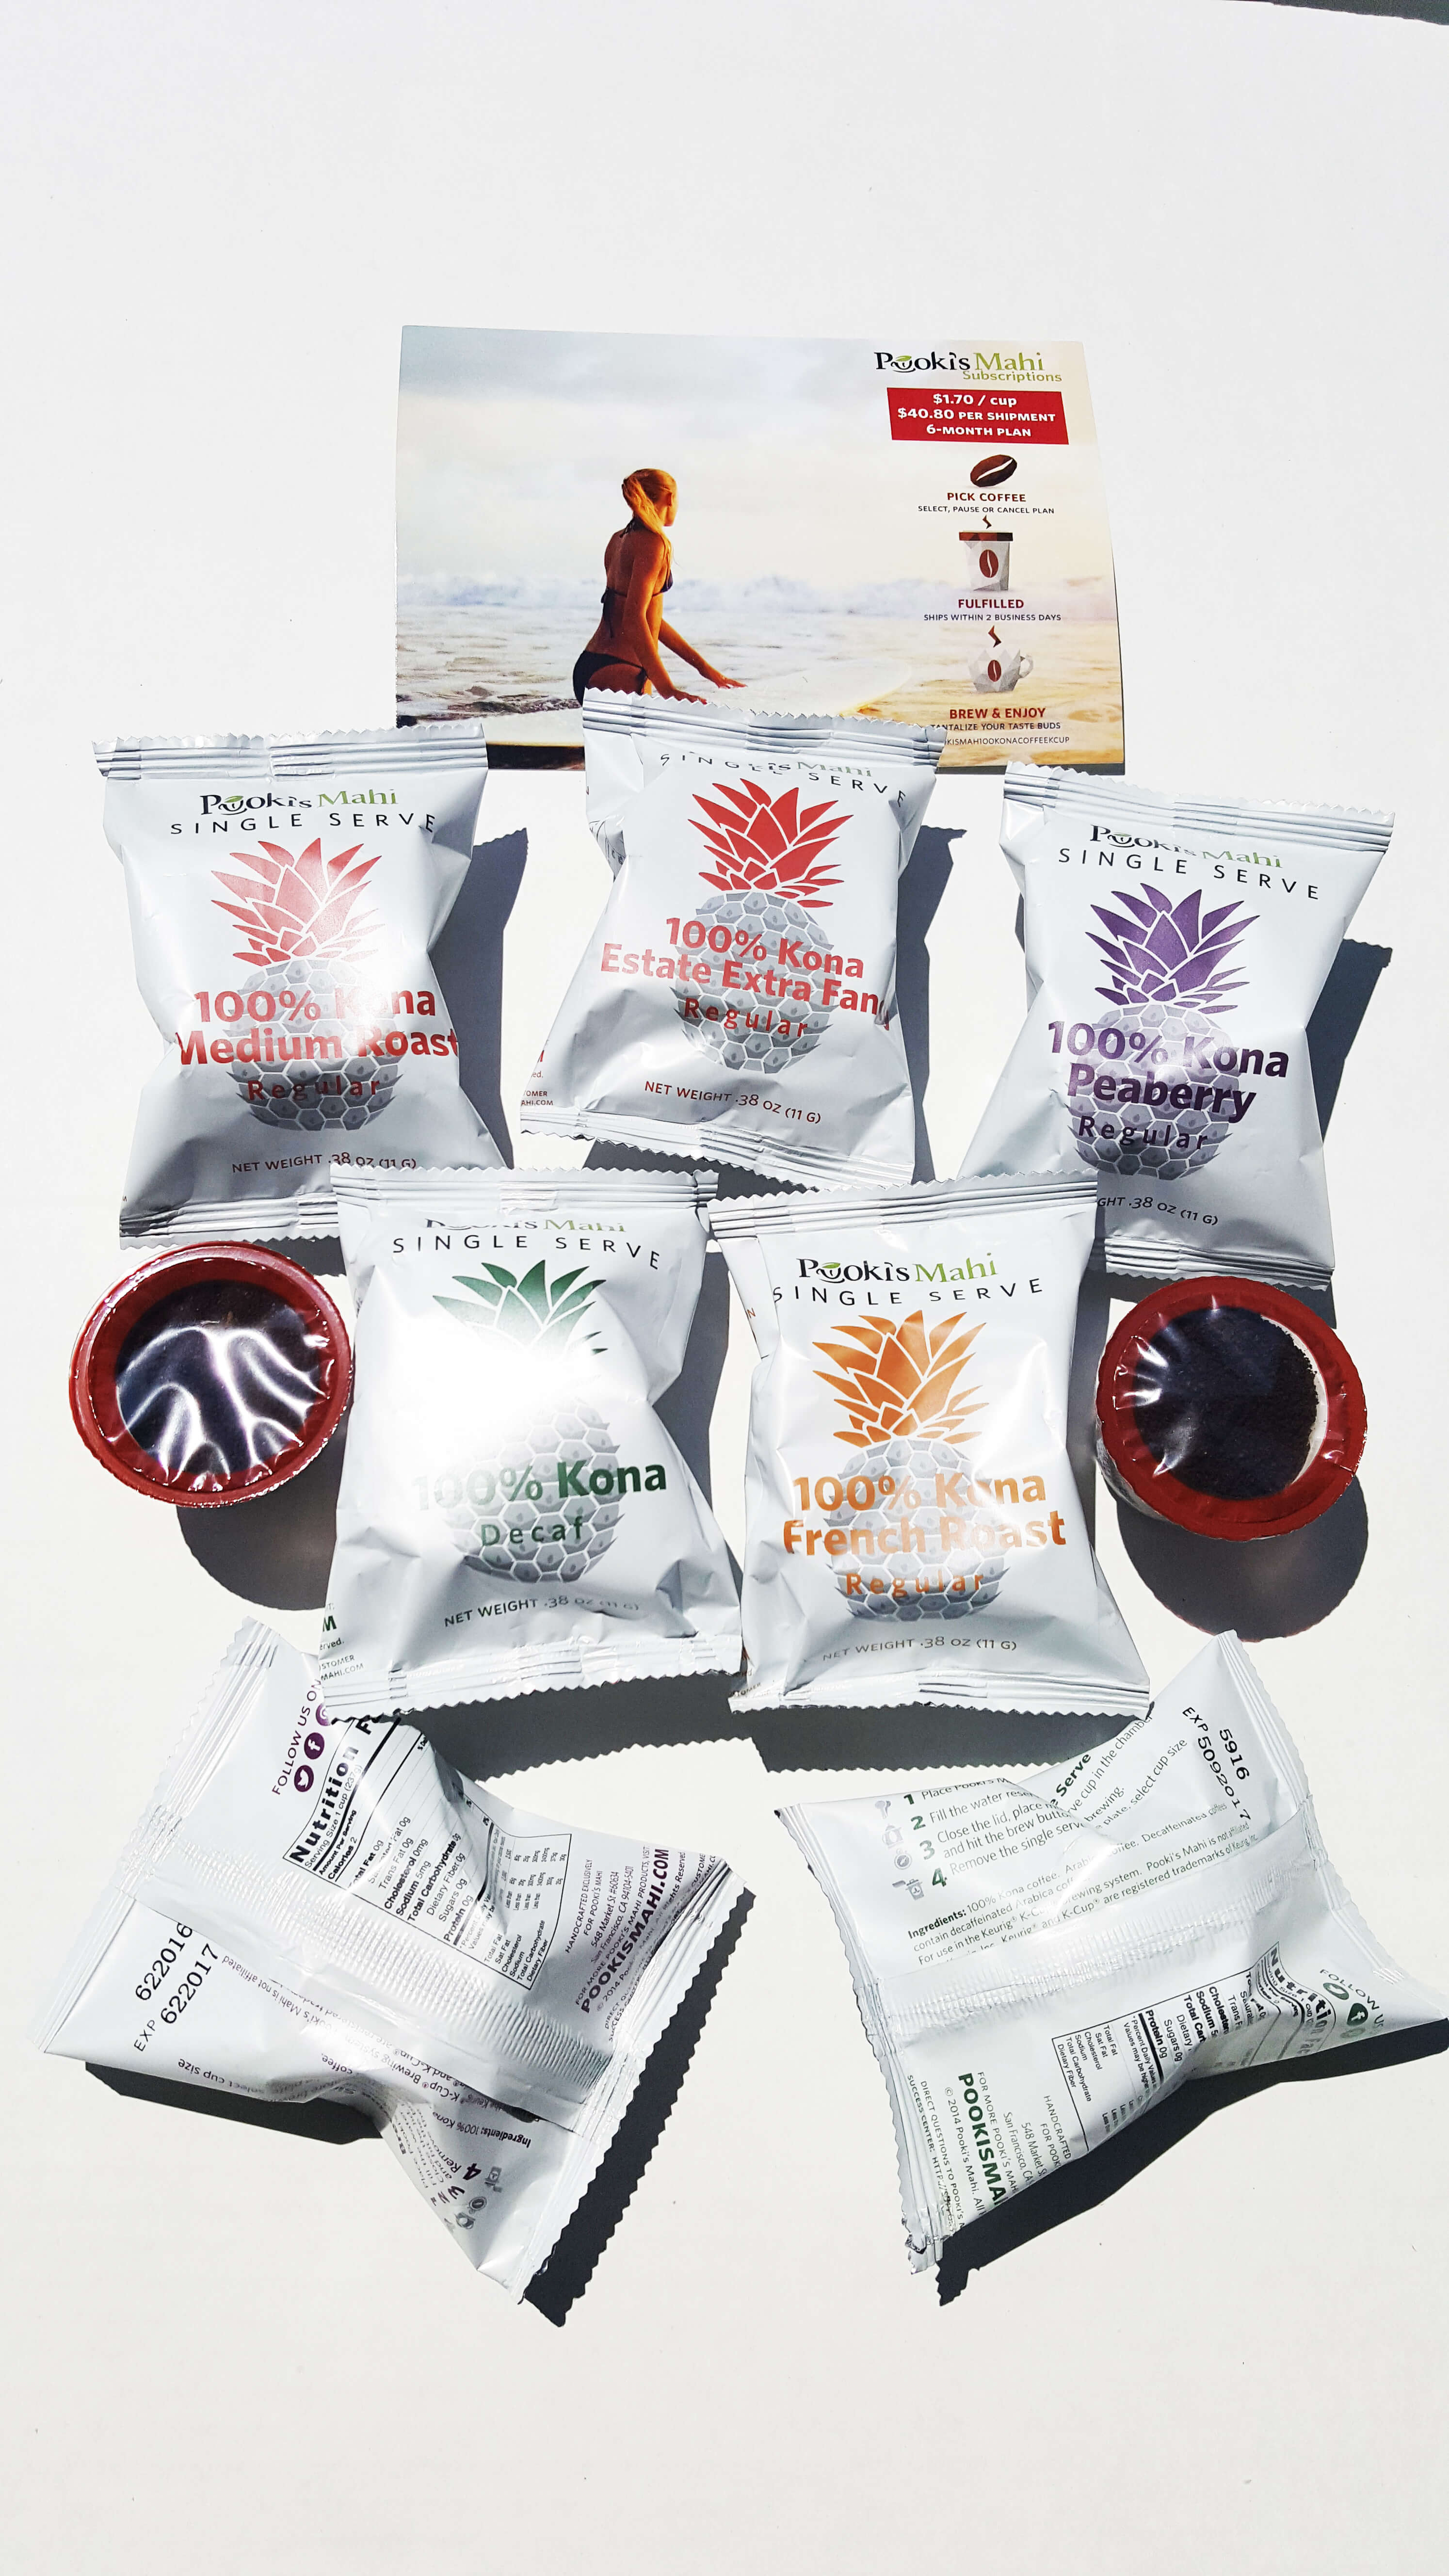 Les Magsalay-Zeller’s Pooki’s Mahi’s Kona Coffee Pods To Be Featured On A Syndicated TV Show